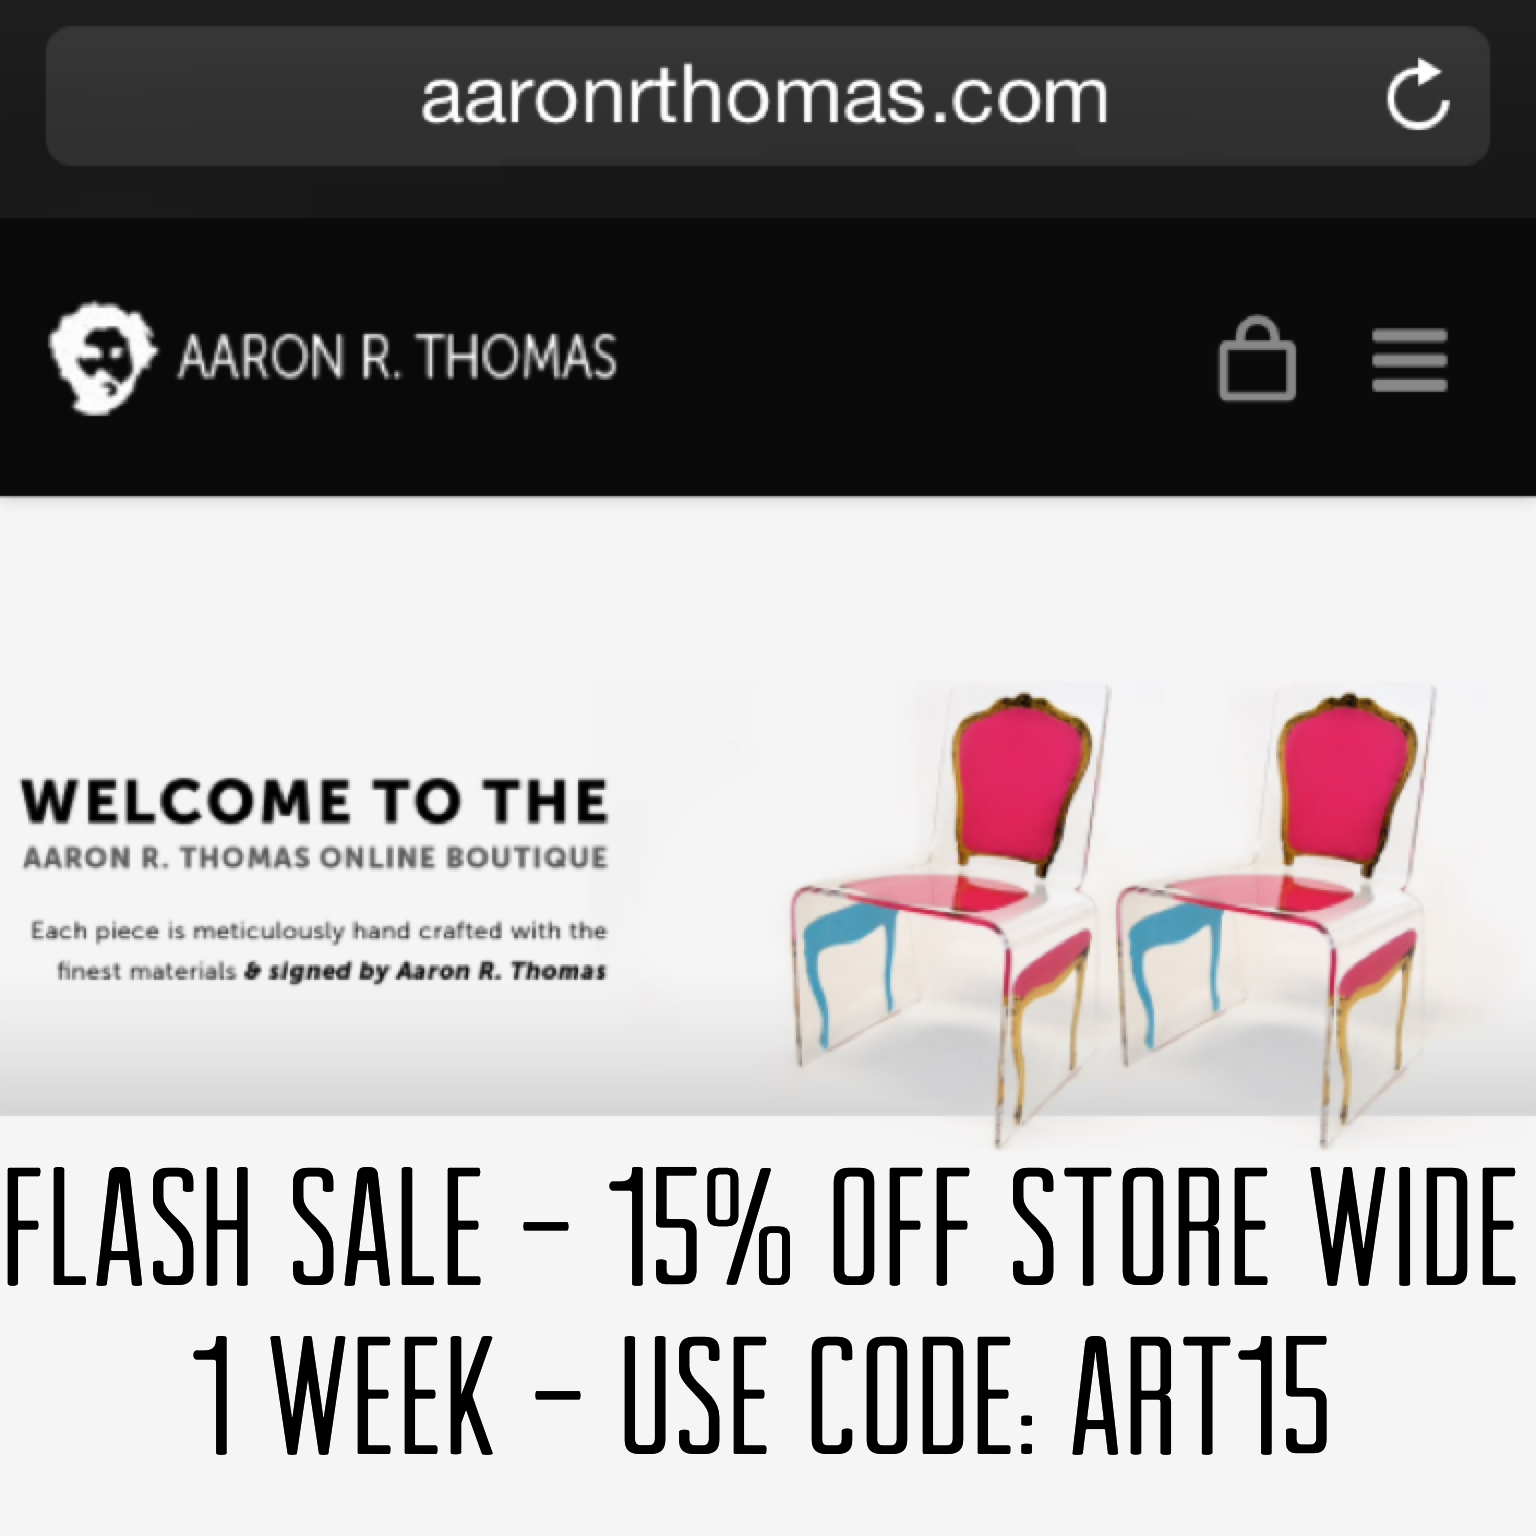 FLASH SALE – 15% OFF STORE WIDE FOR ONE-WEEK ONLY